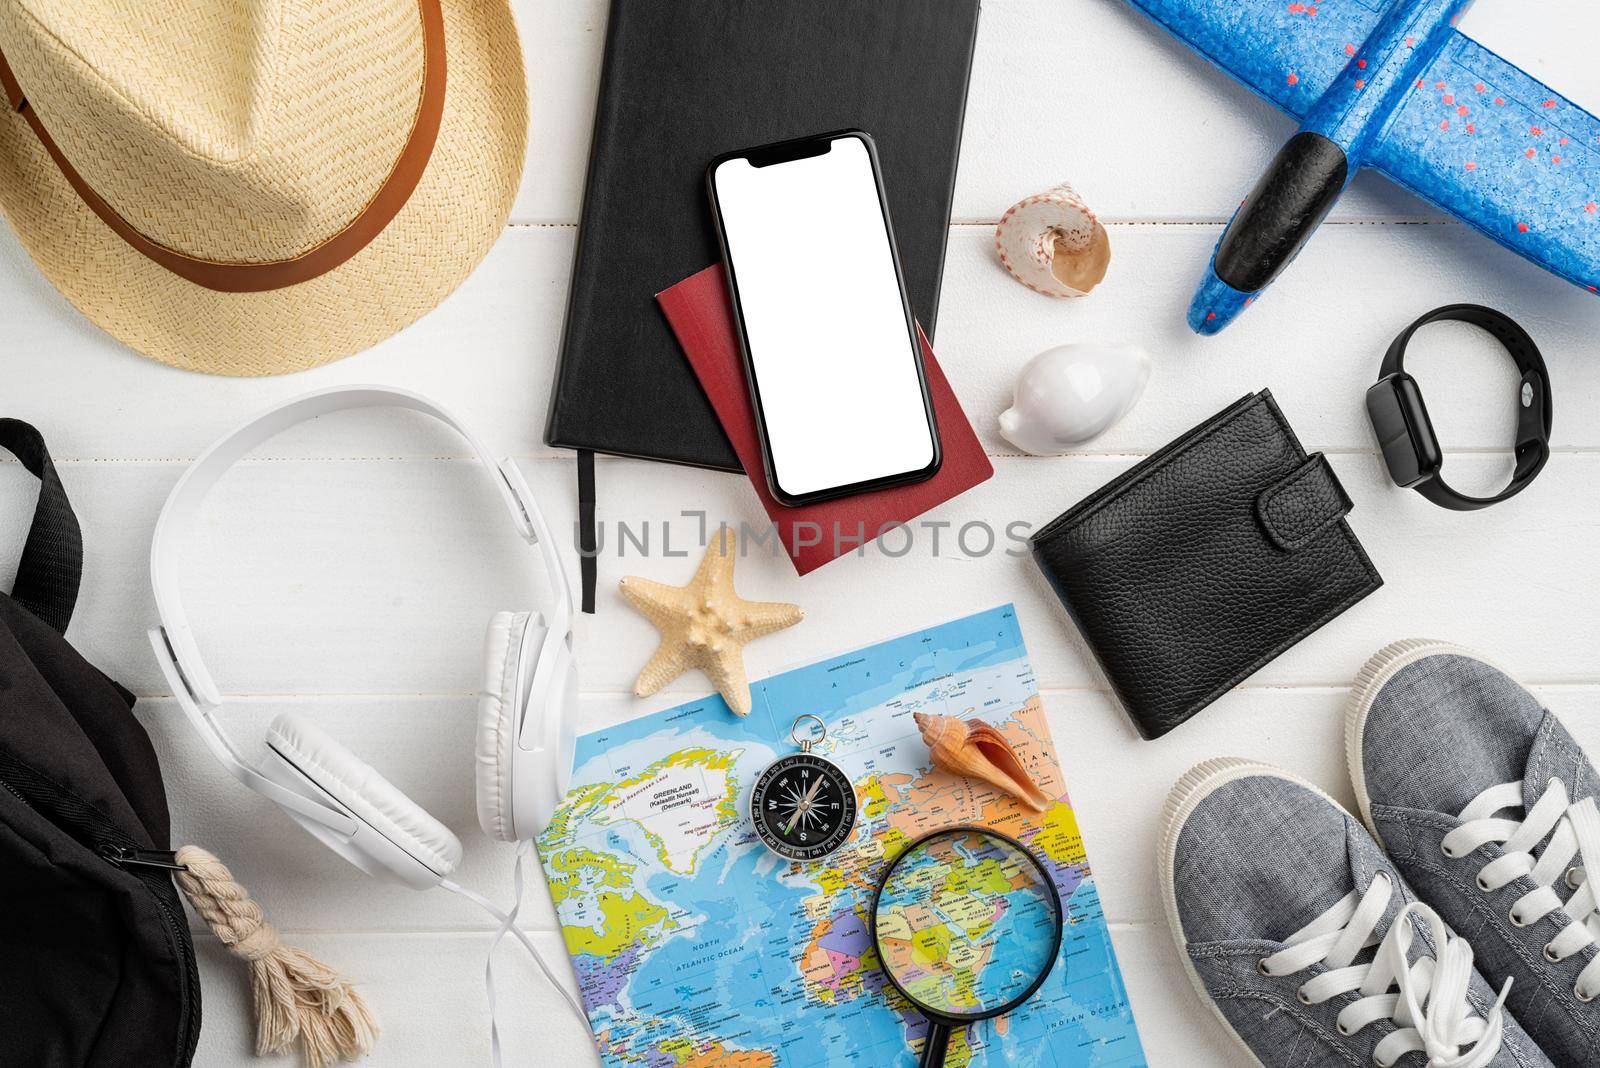 travel plan, trip and vacation, technology. Top view travel accessories with shoes, map, smartphone with mockup screen, hat. Copy space